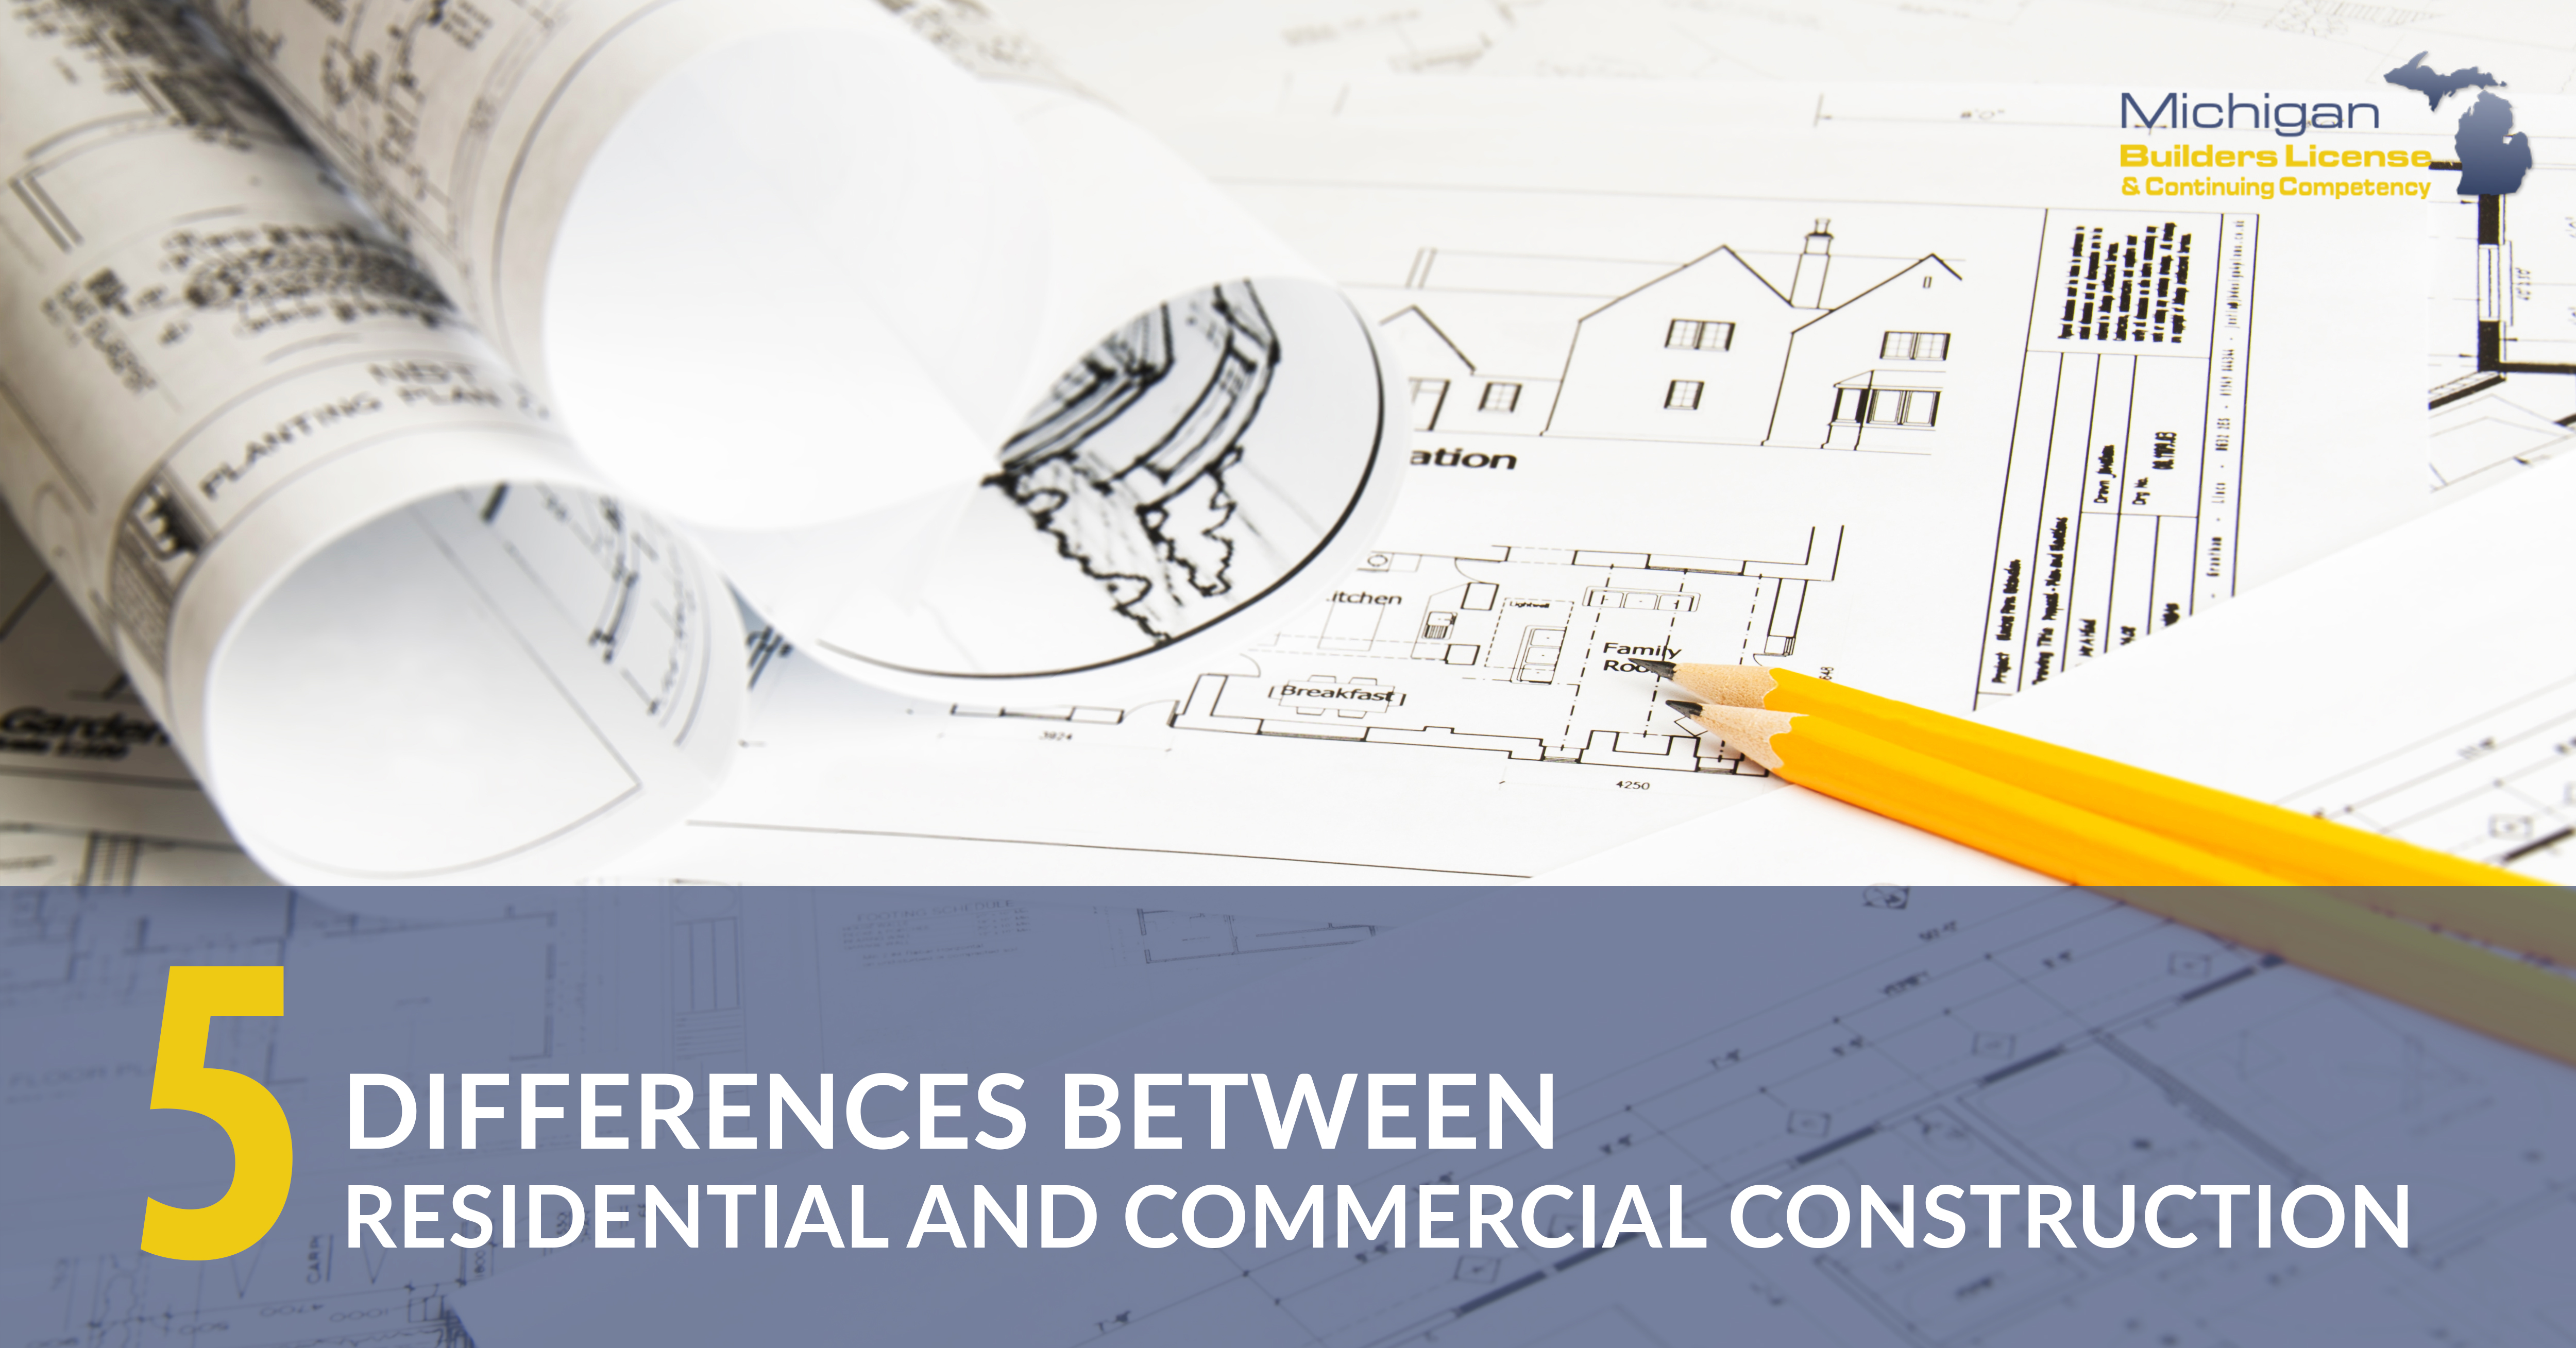 The 5 Main Differences Between Residential and Commercial Construction